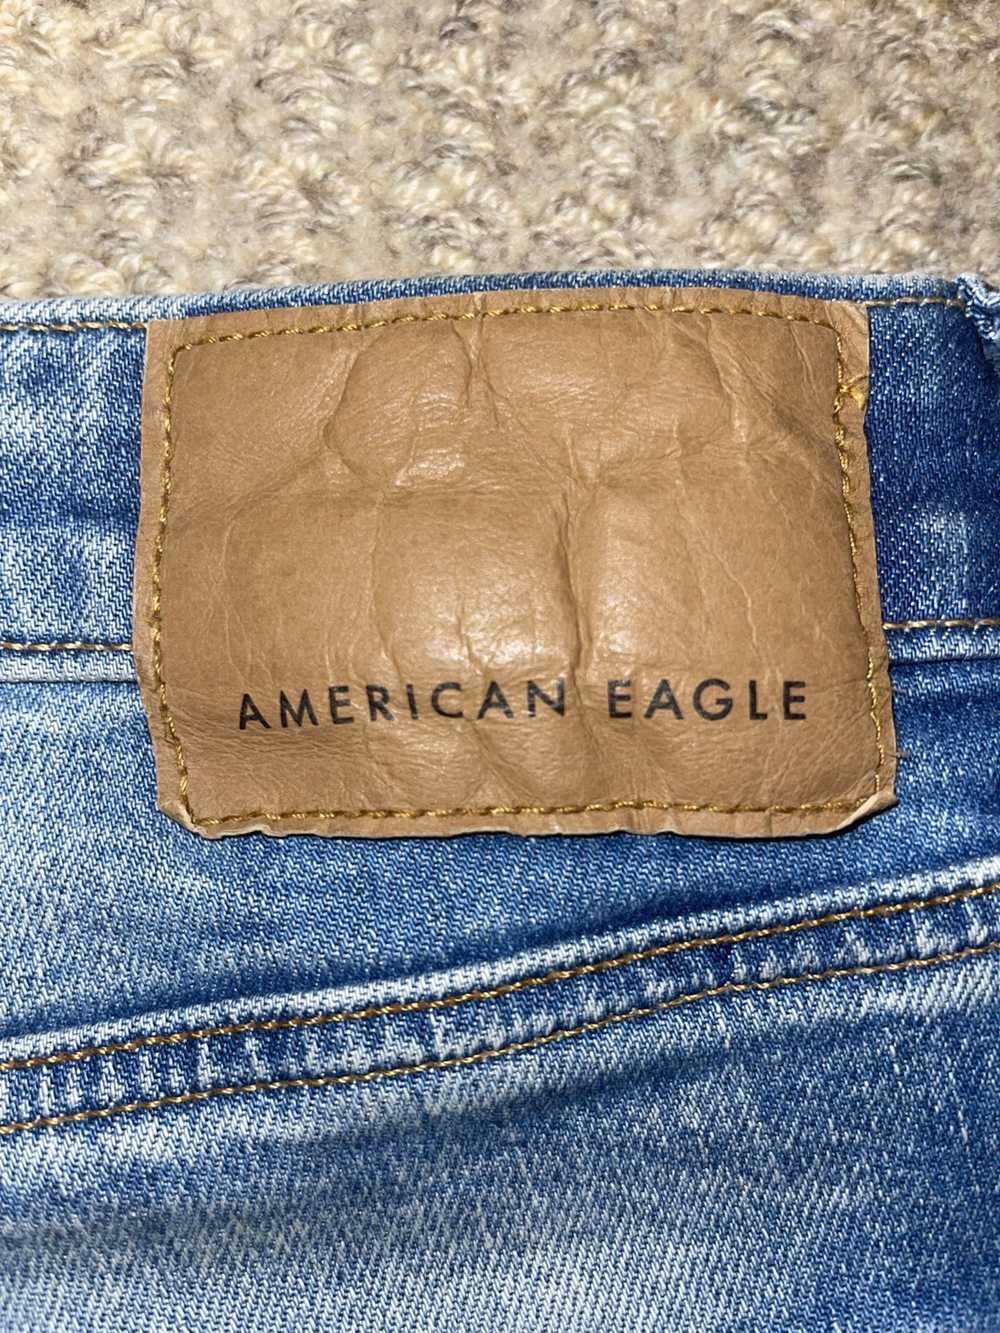 American Eagle Outfitters × Distressed Denim Amer… - image 3